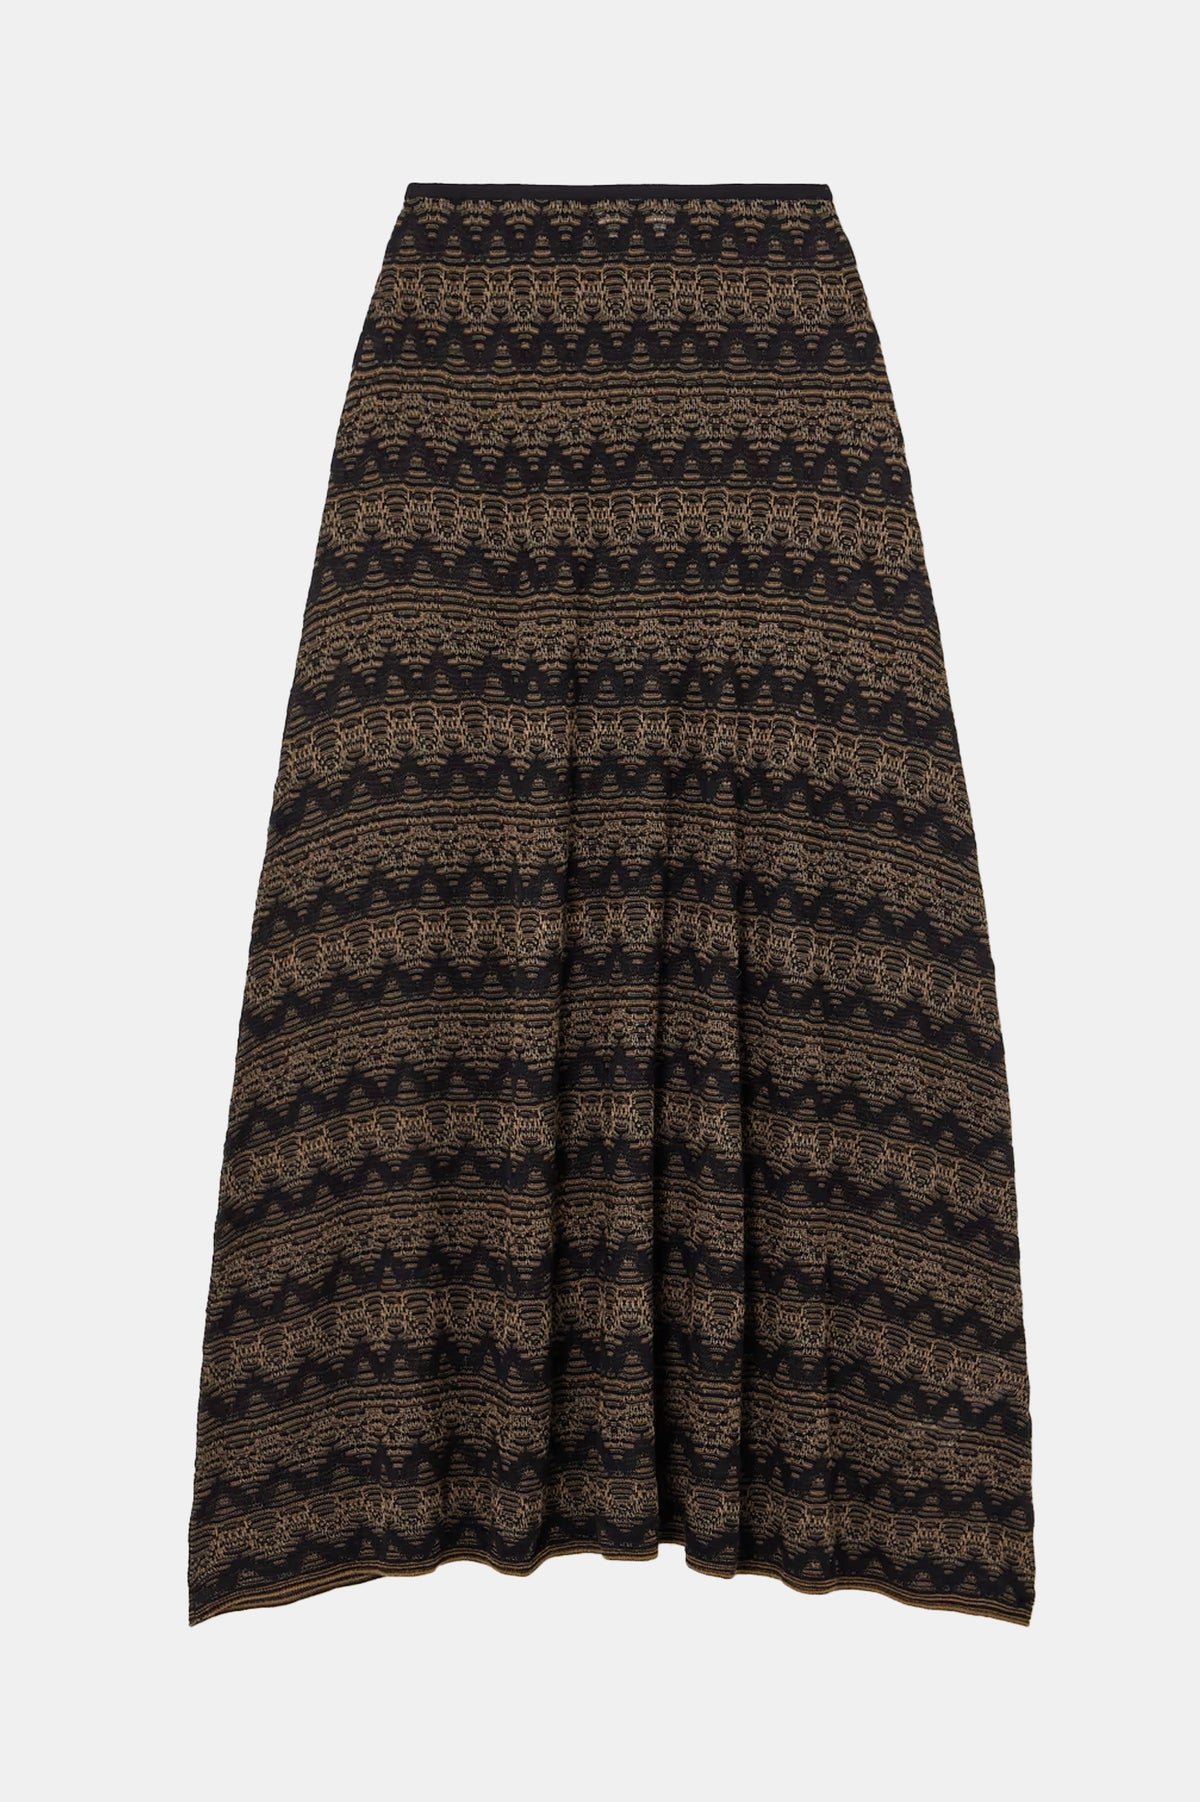 Palais Knit Skirt in Black Cacao